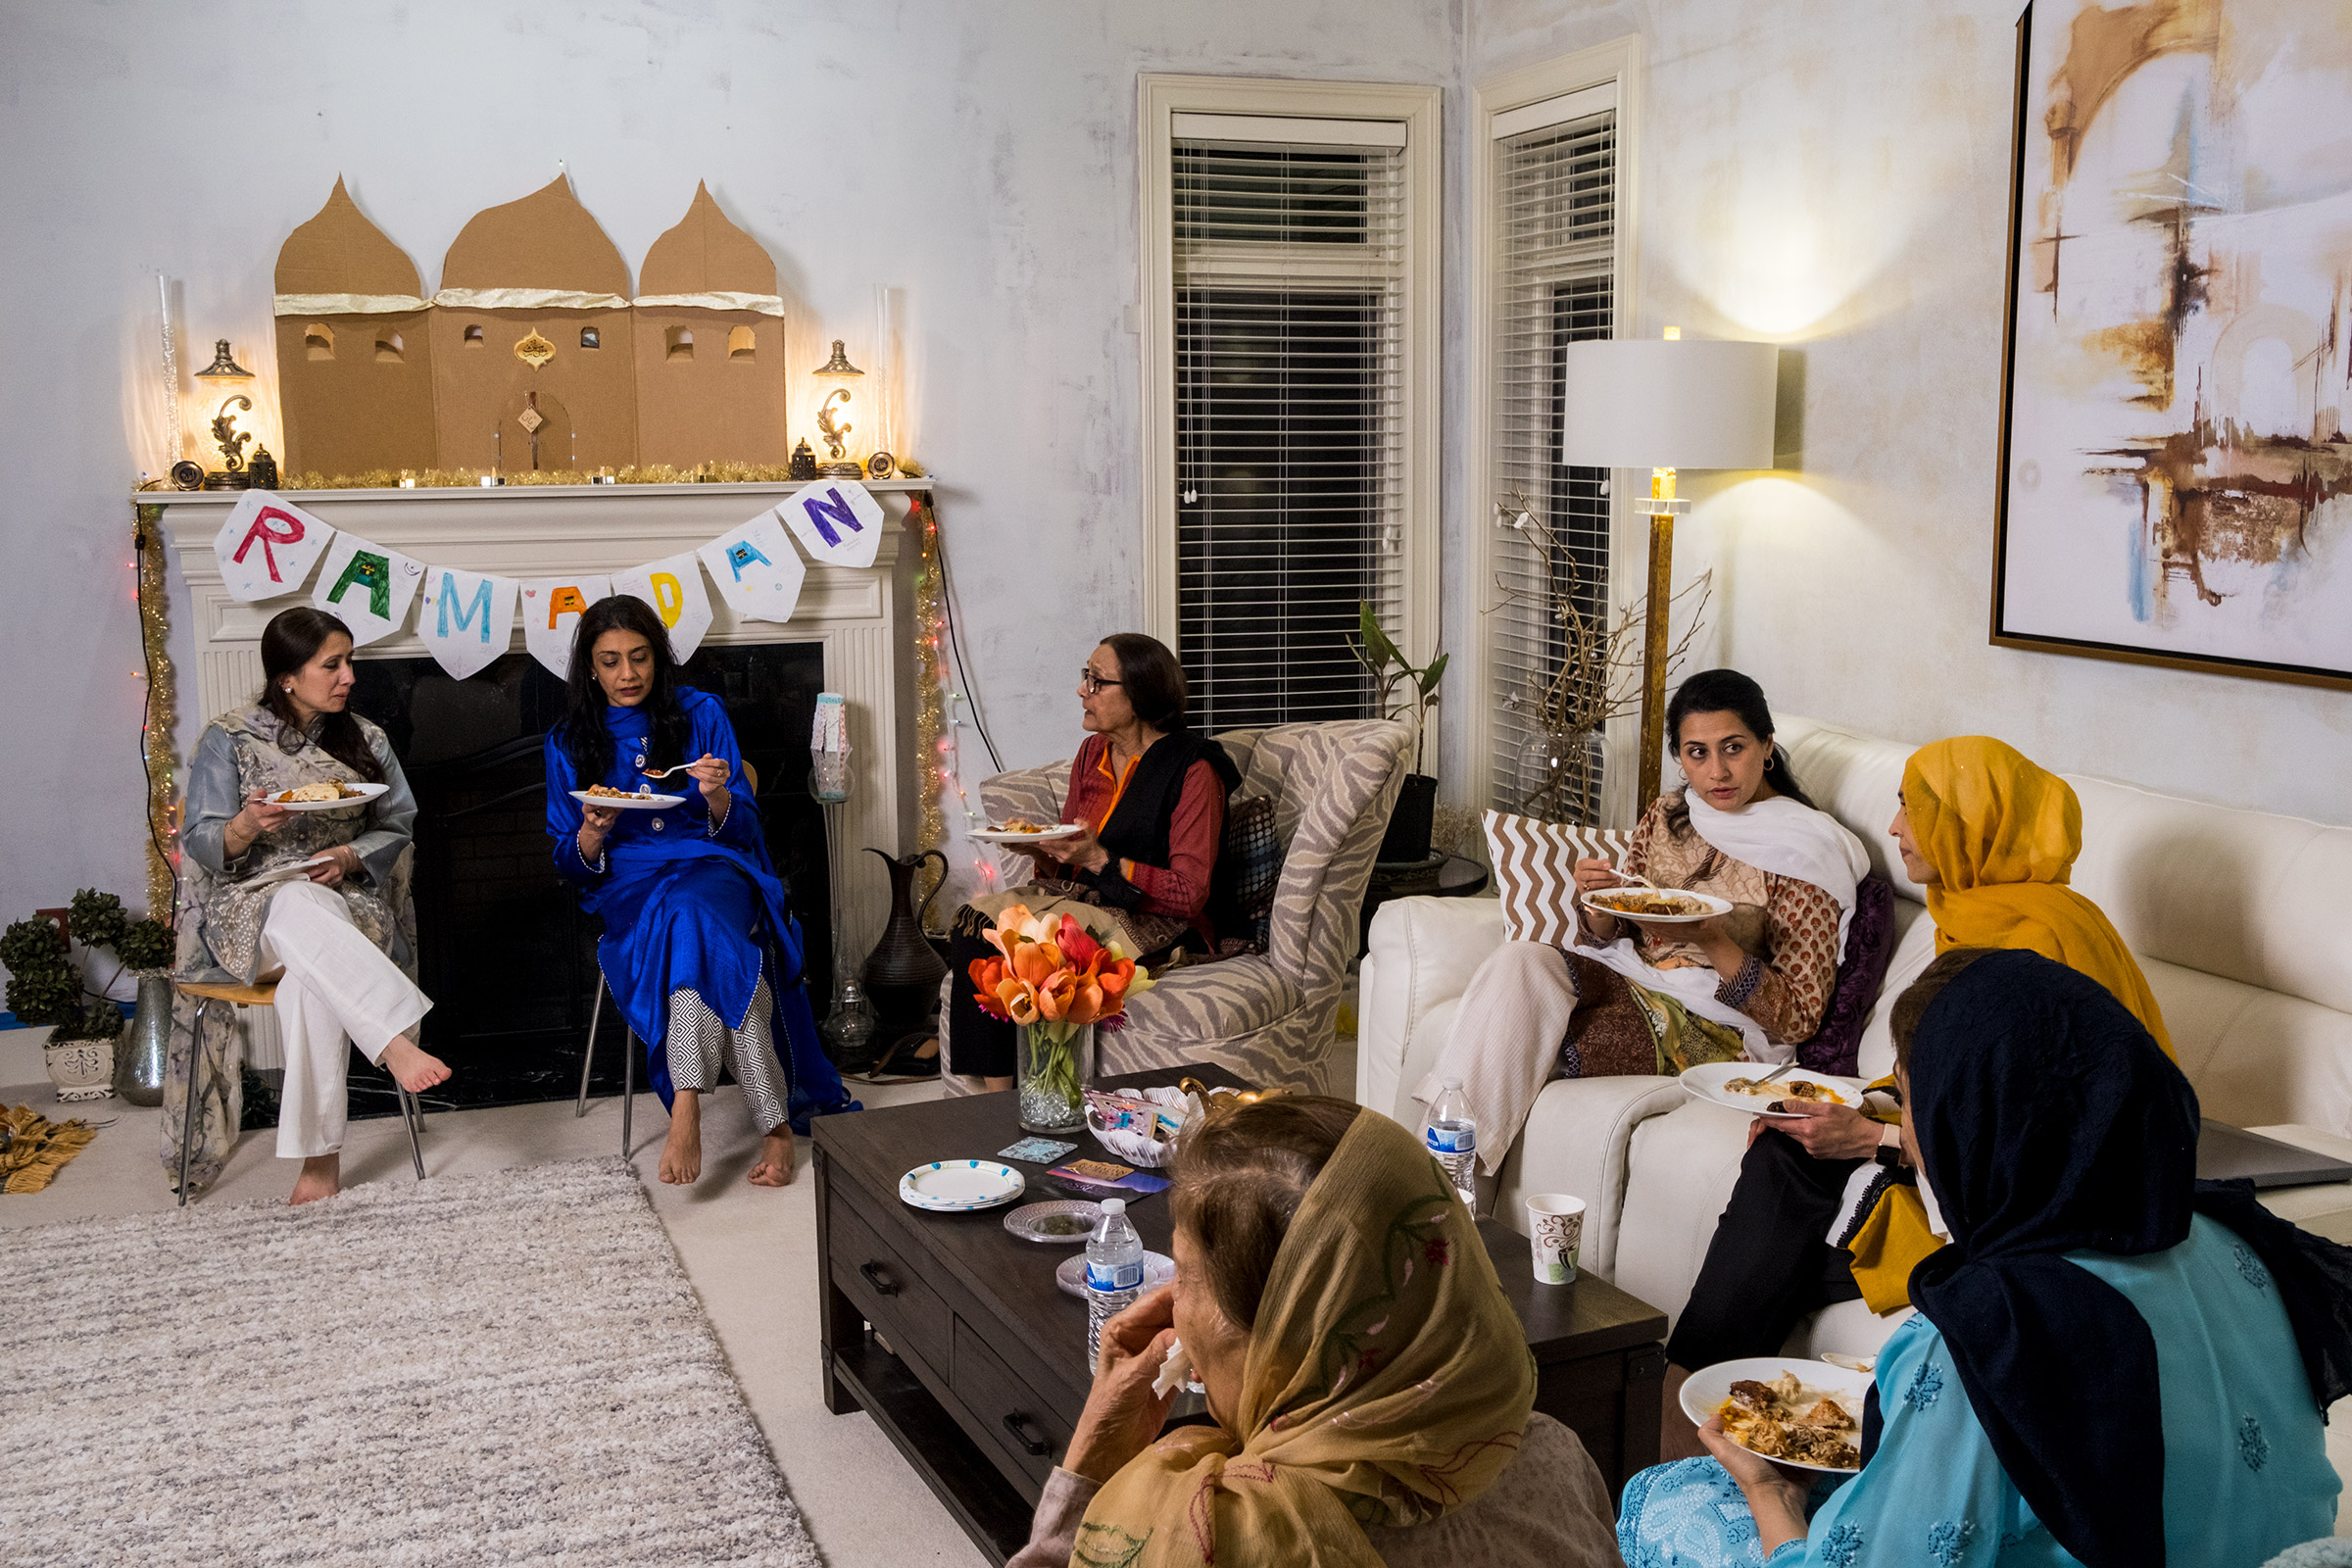 Muslim women break their fast with iftar and chat. (Eli Hiller for TIME)